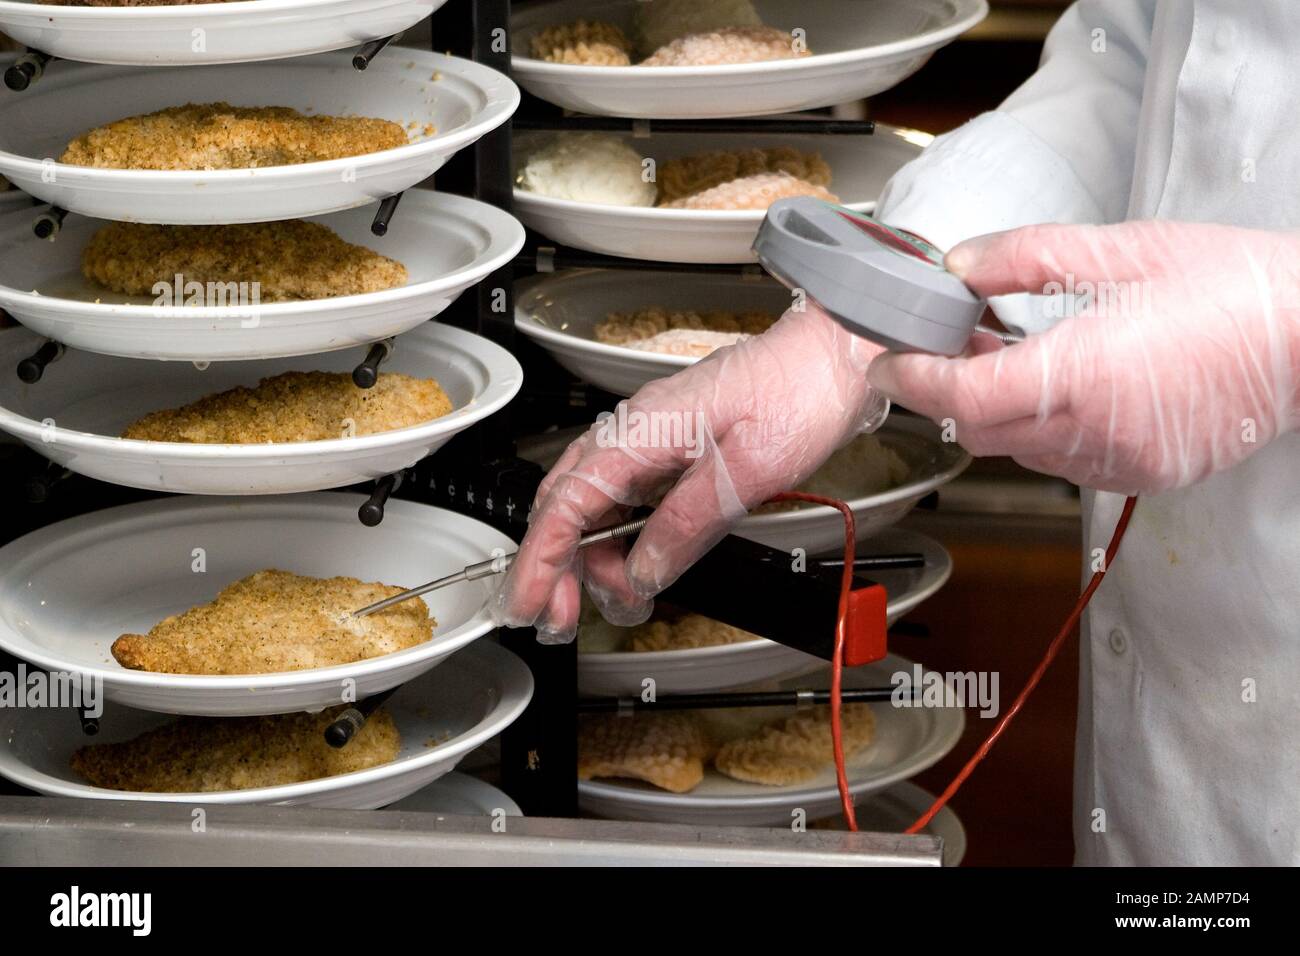 Food safety inspector measuring the temperature of cooked meals with a probe thermometer. Stock Photo